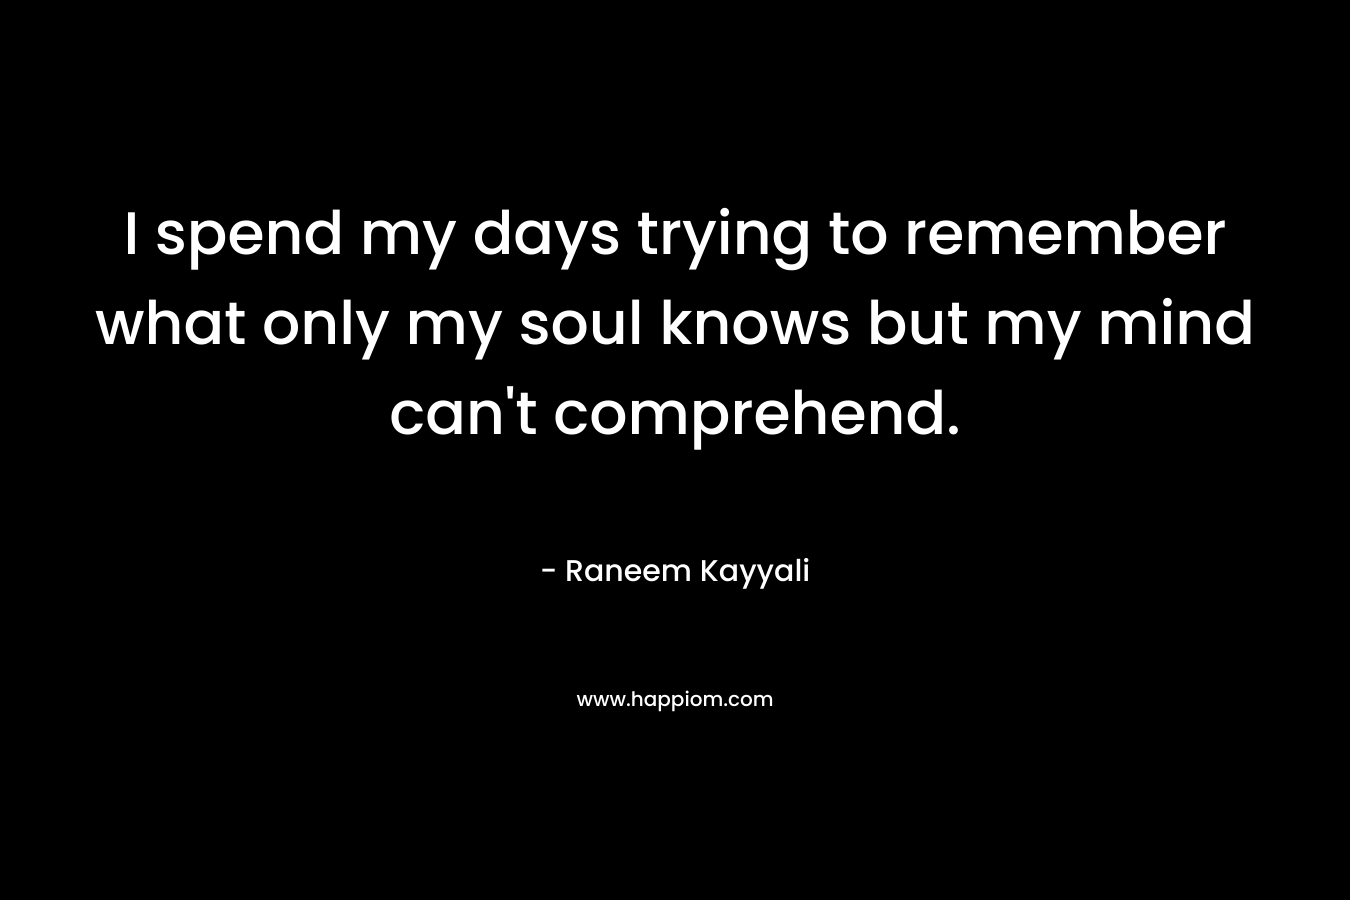 I spend my days trying to remember what only my soul knows but my mind can’t comprehend. – Raneem Kayyali